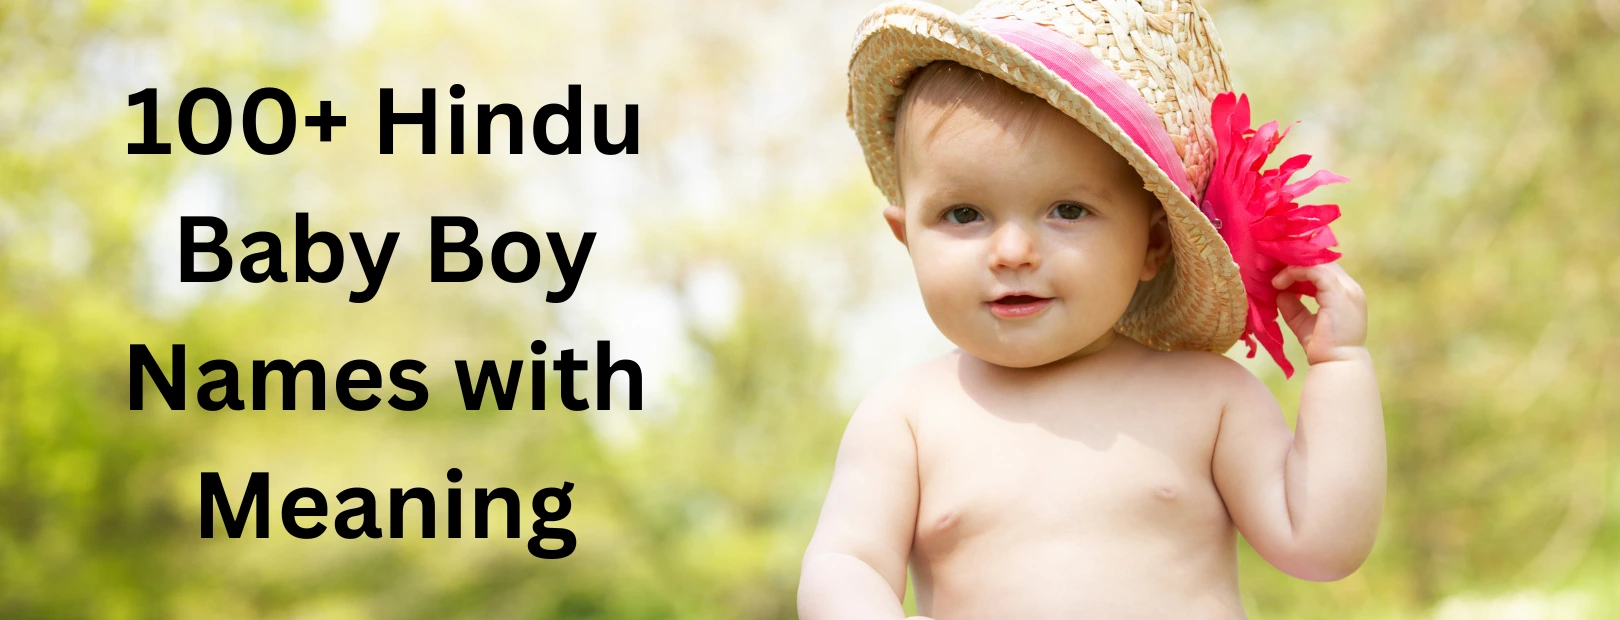 100+ Hindu Baby Boy Names with Meaning | Unique and Modern